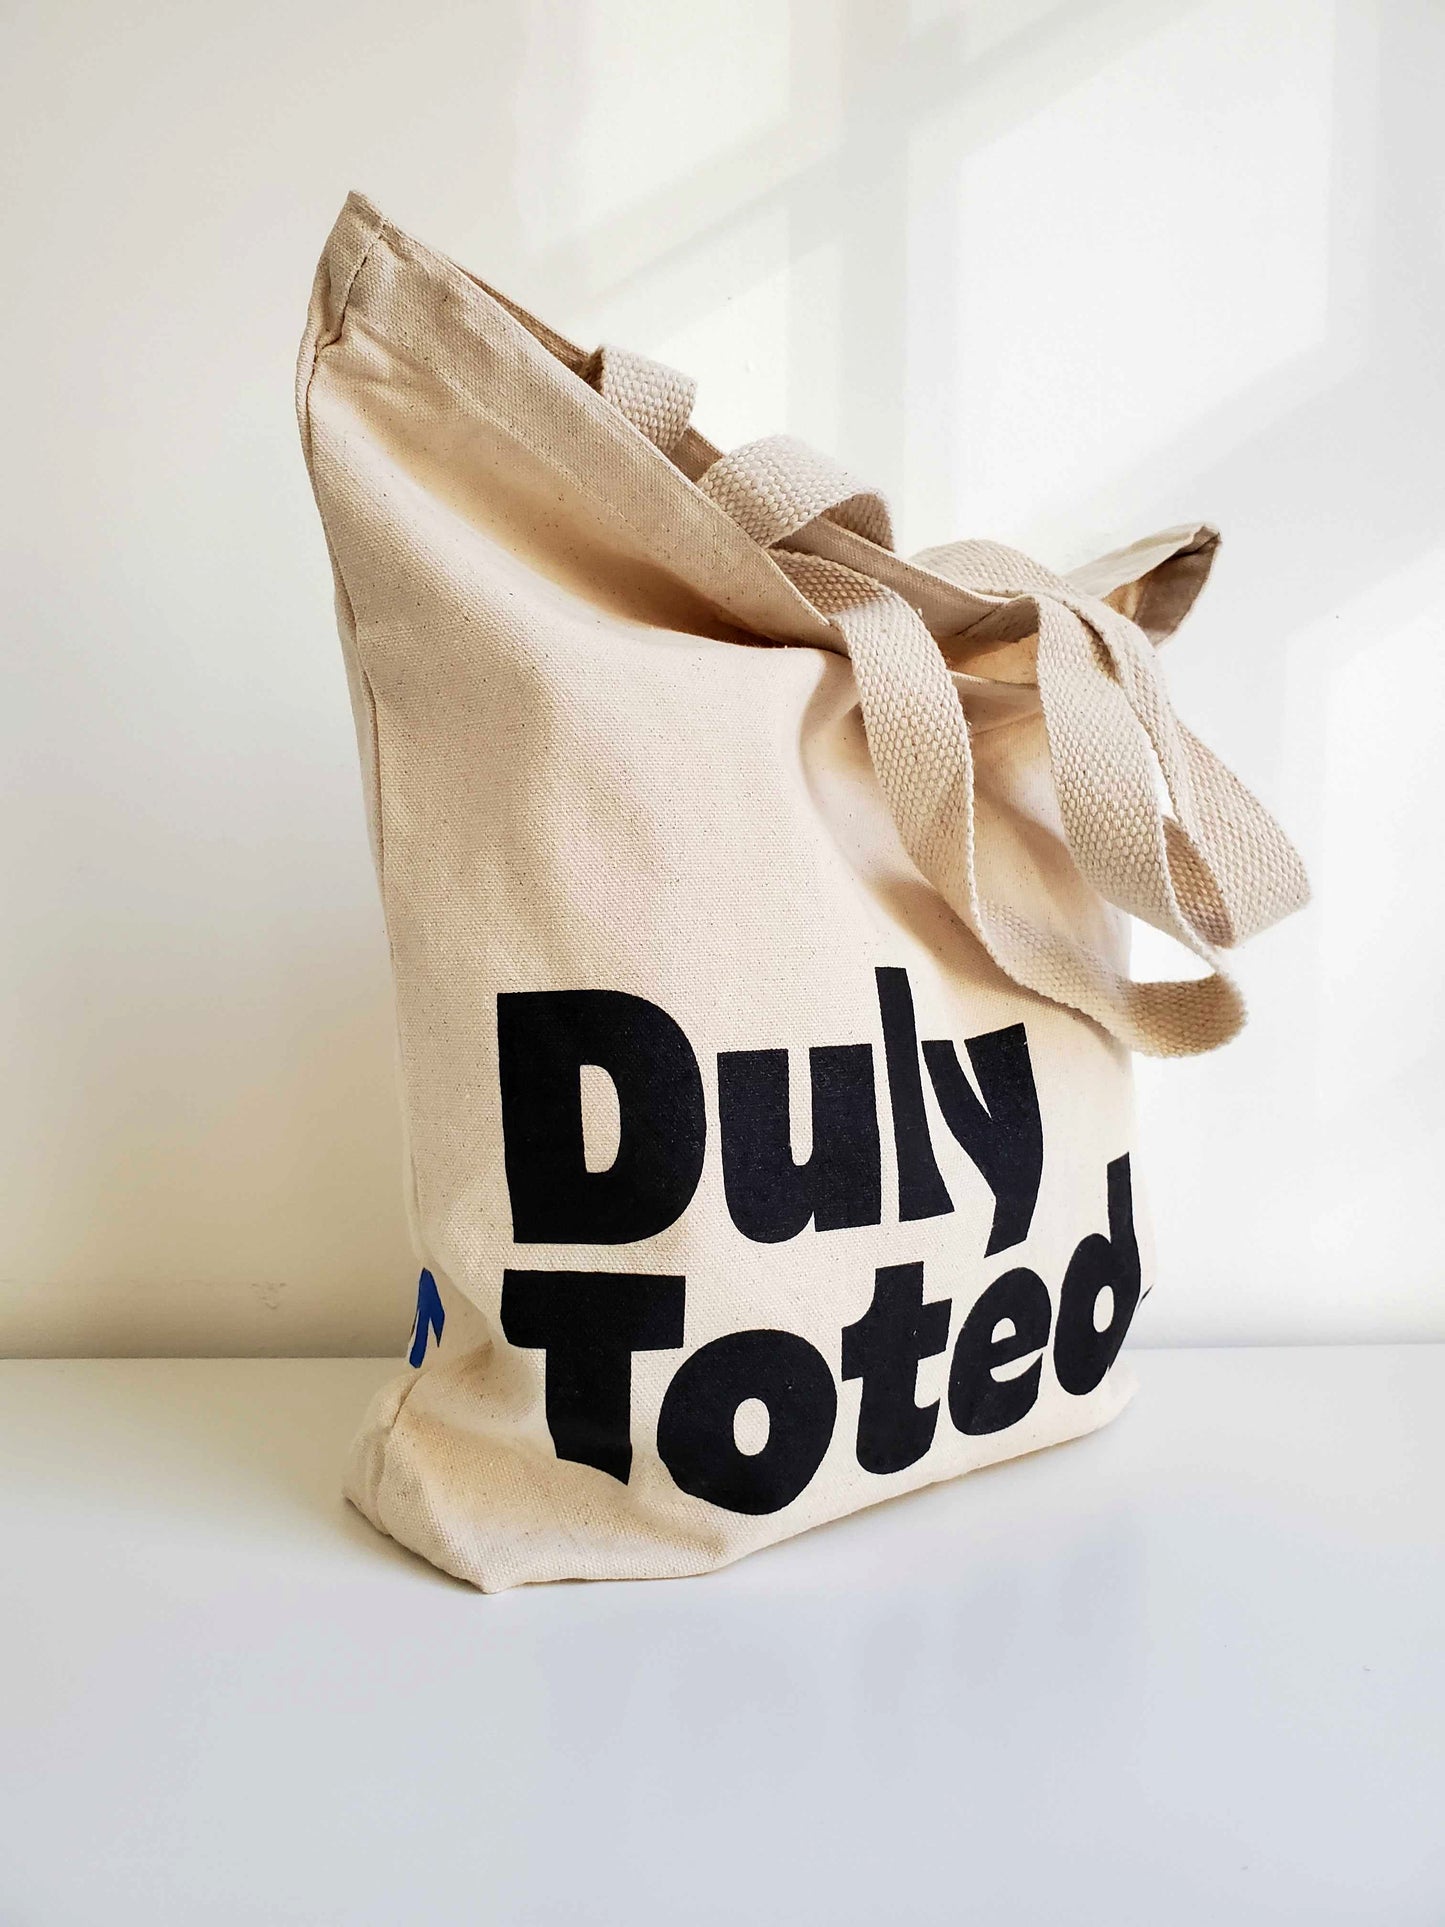 The Duly Toted tote bag standing upright.